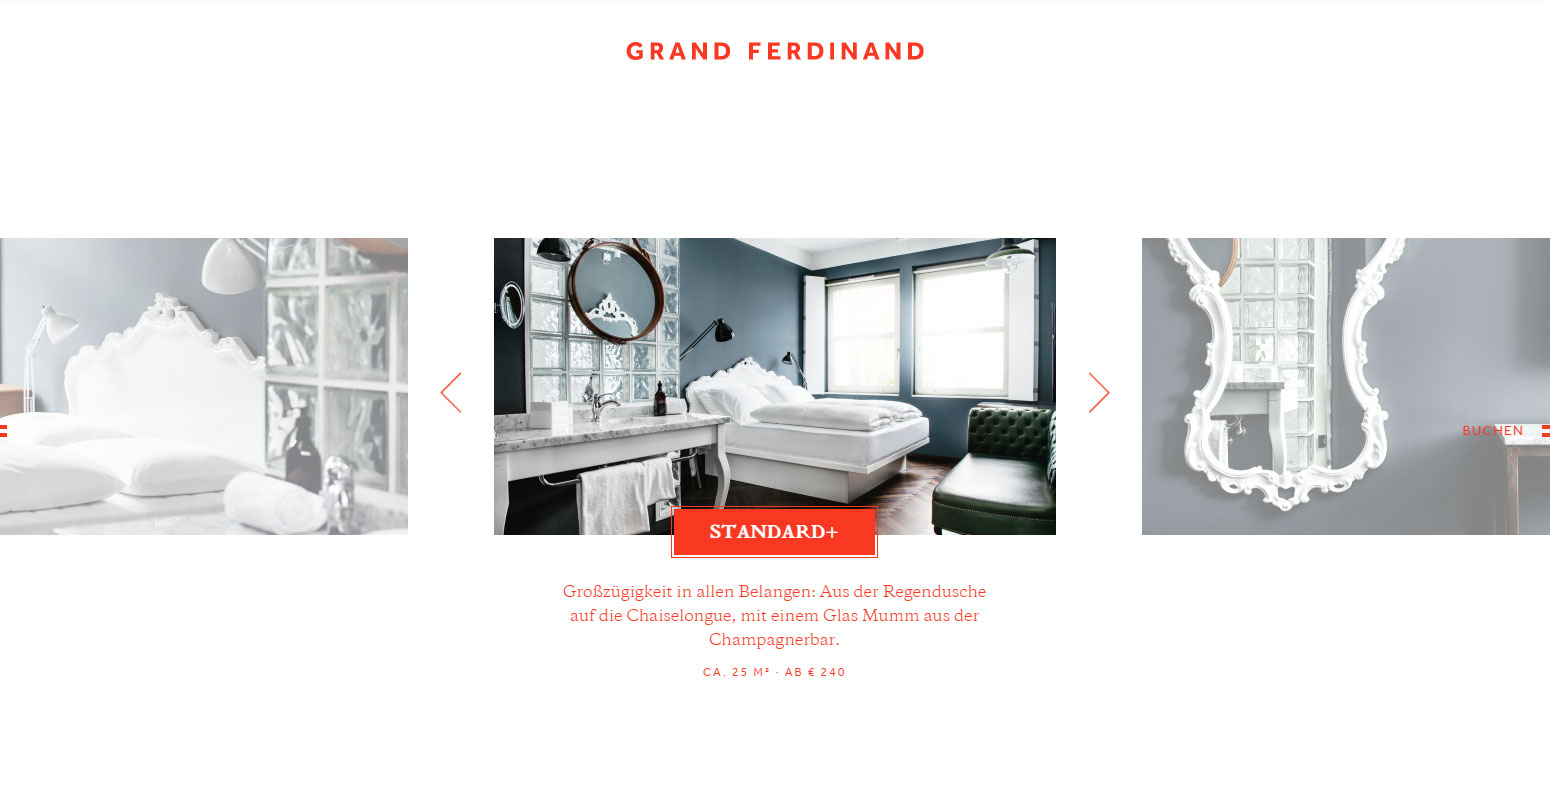 Grand Ferdinand - Website of the Day